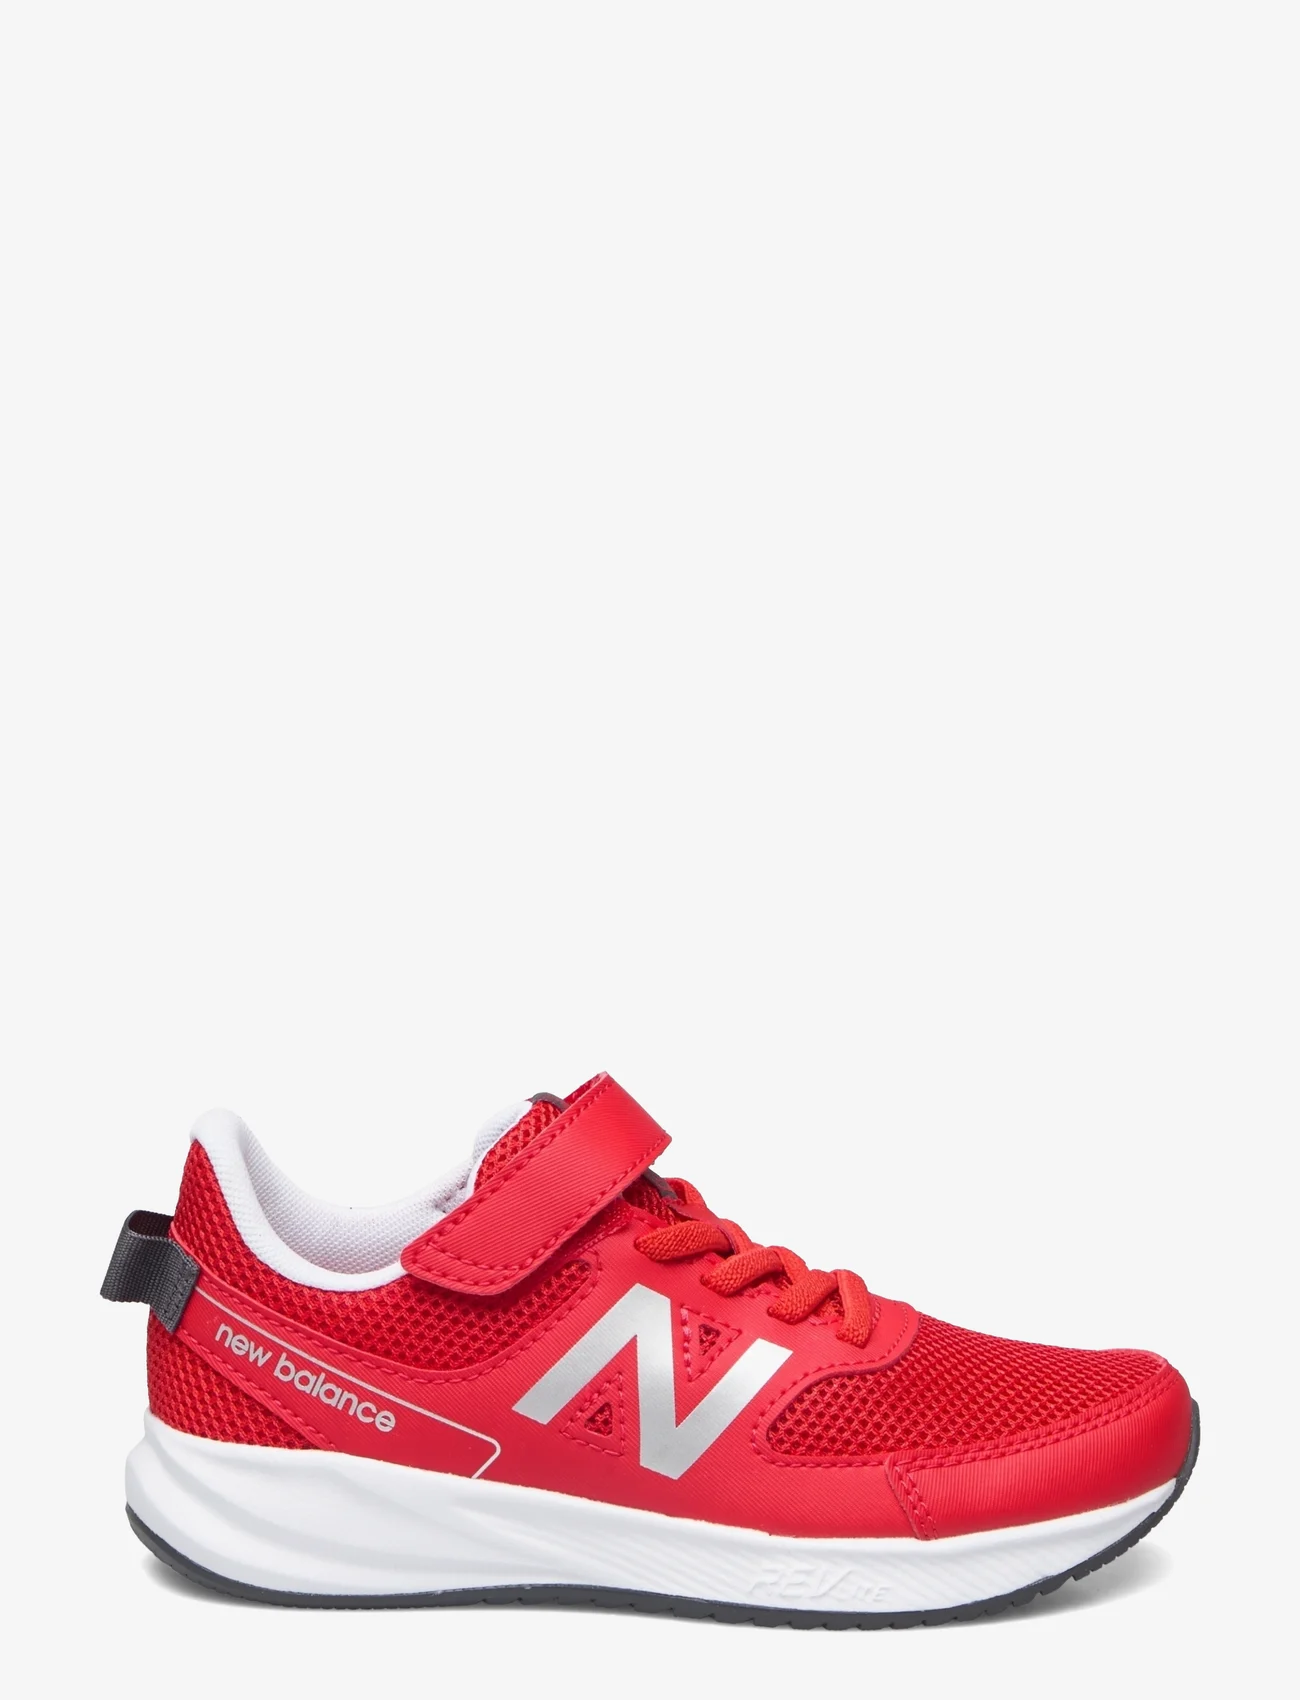 New Balance - New Balance 570 v3 Kids Bungee Lace with Hook & Loop Top Strap - kinder - true red - 1